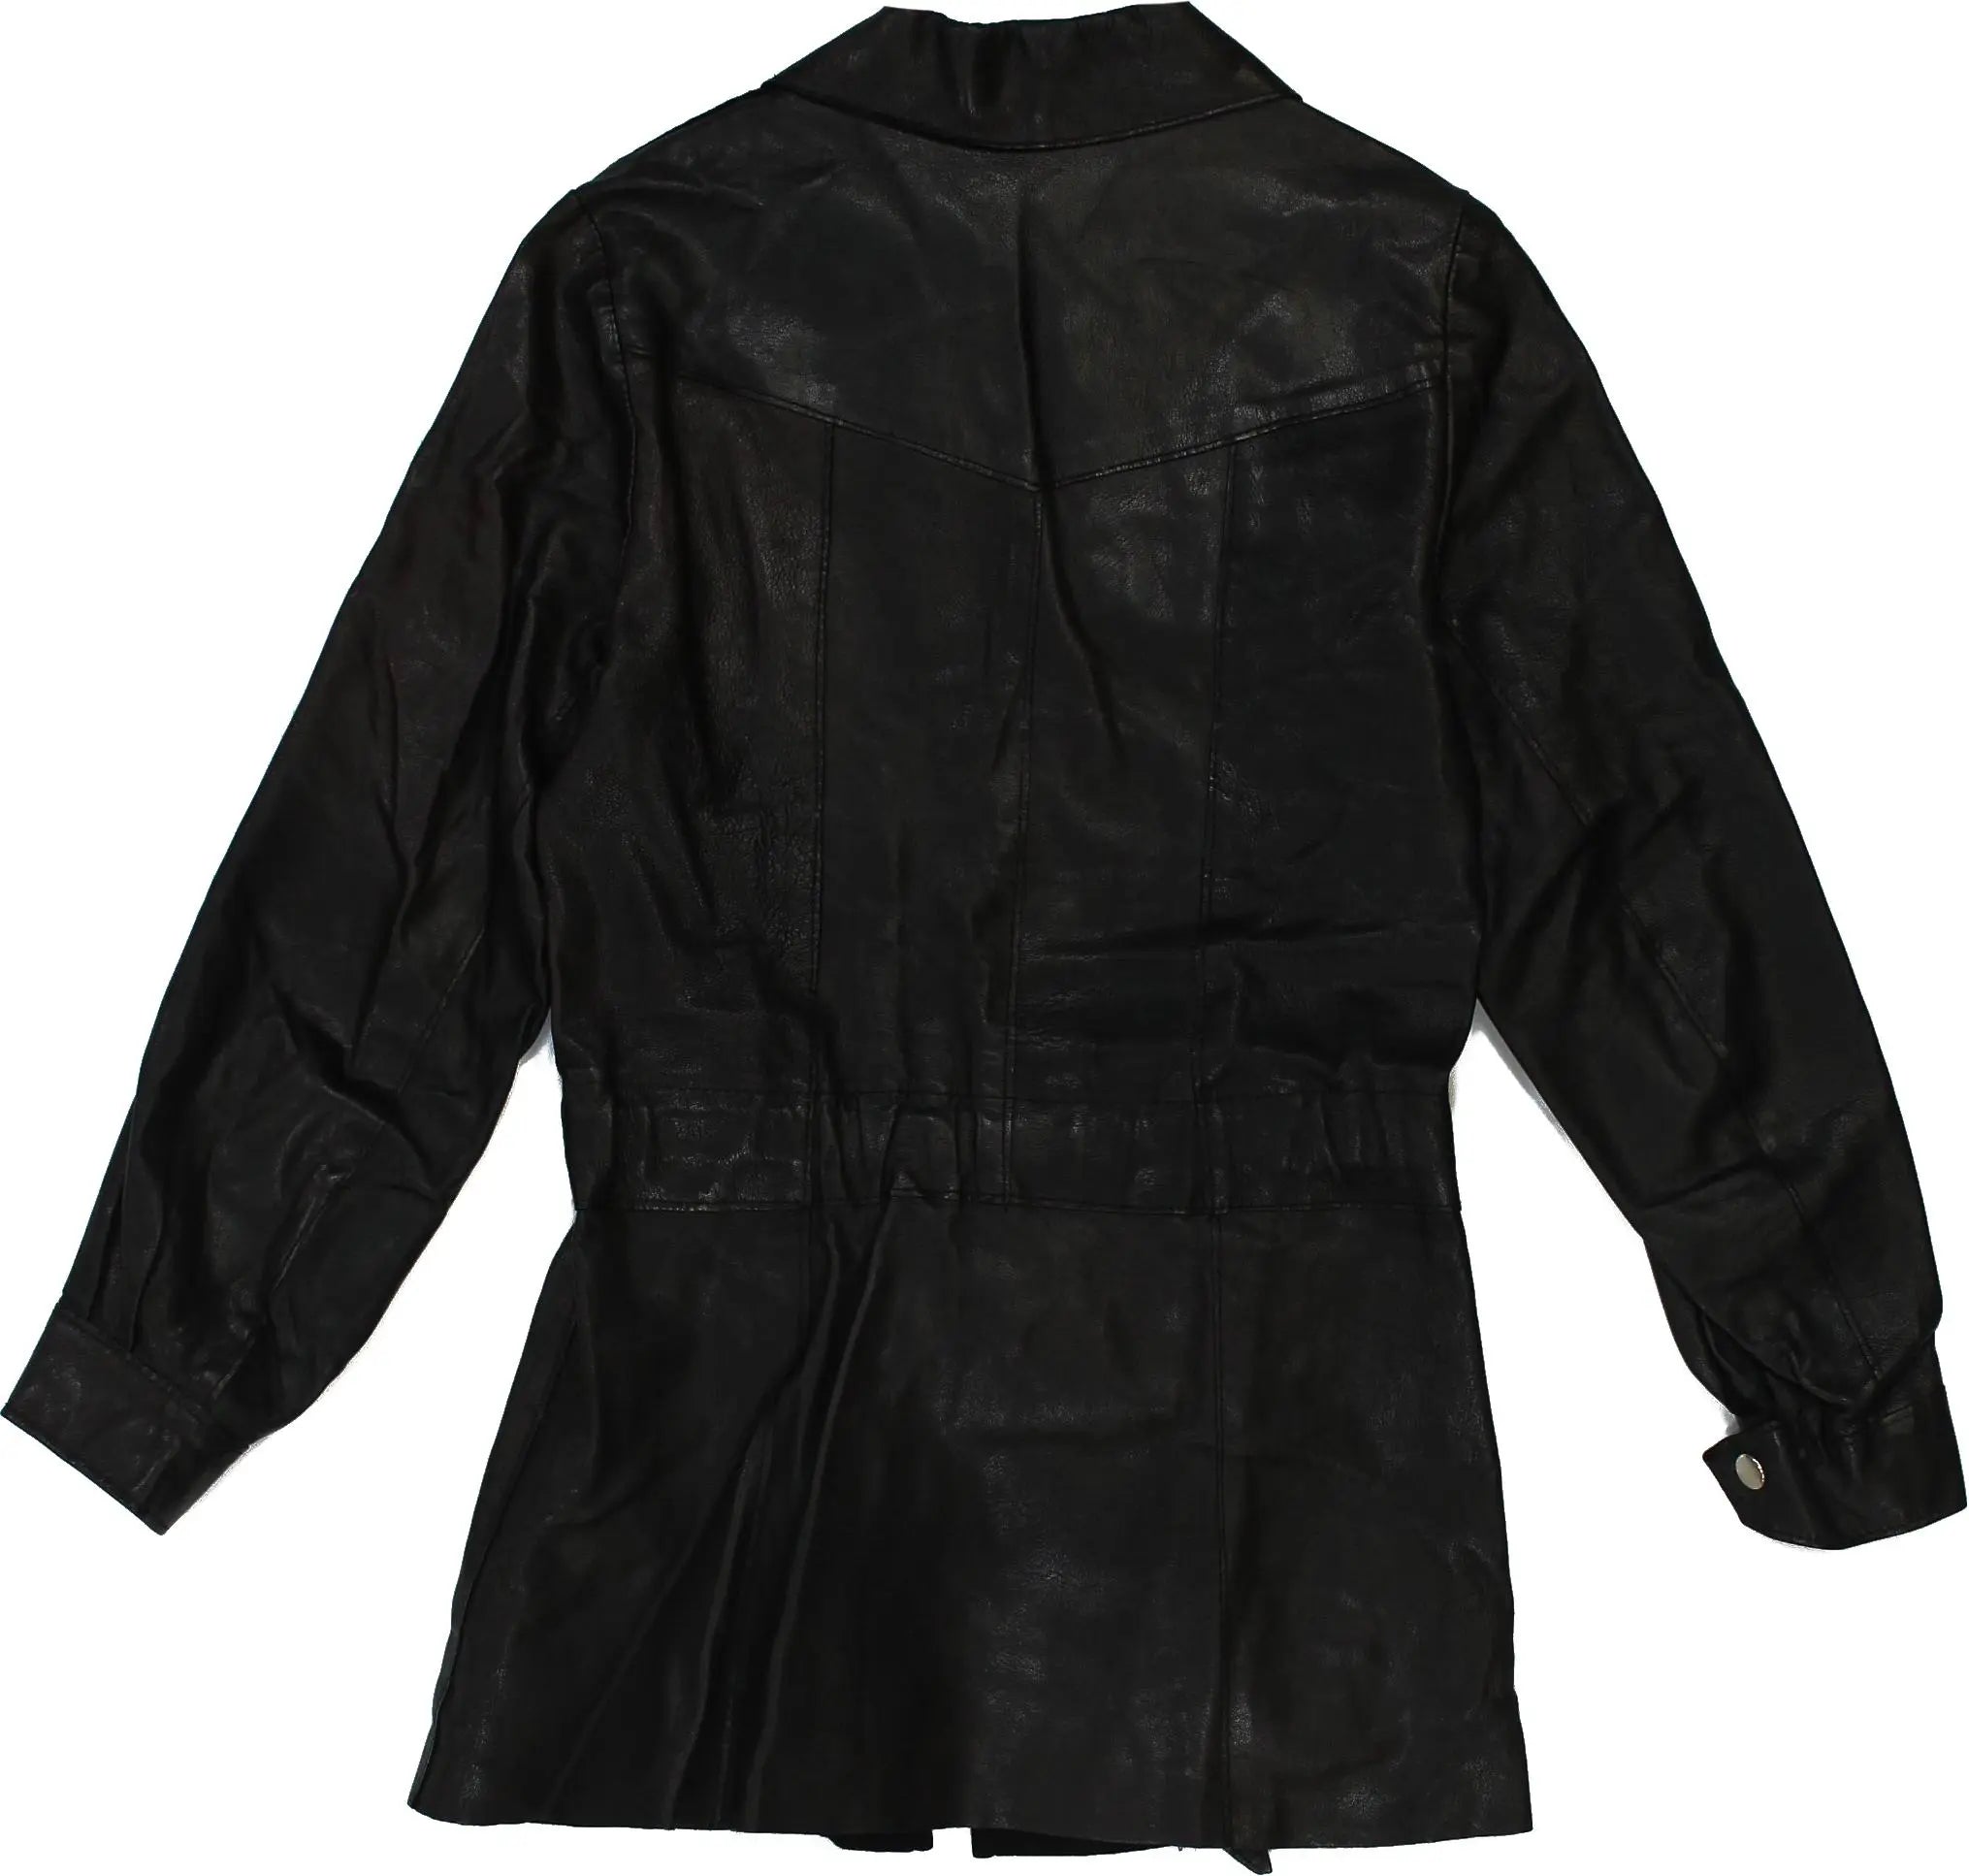 Unknown - Black Leather Coat- ThriftTale.com - Vintage and second handclothing